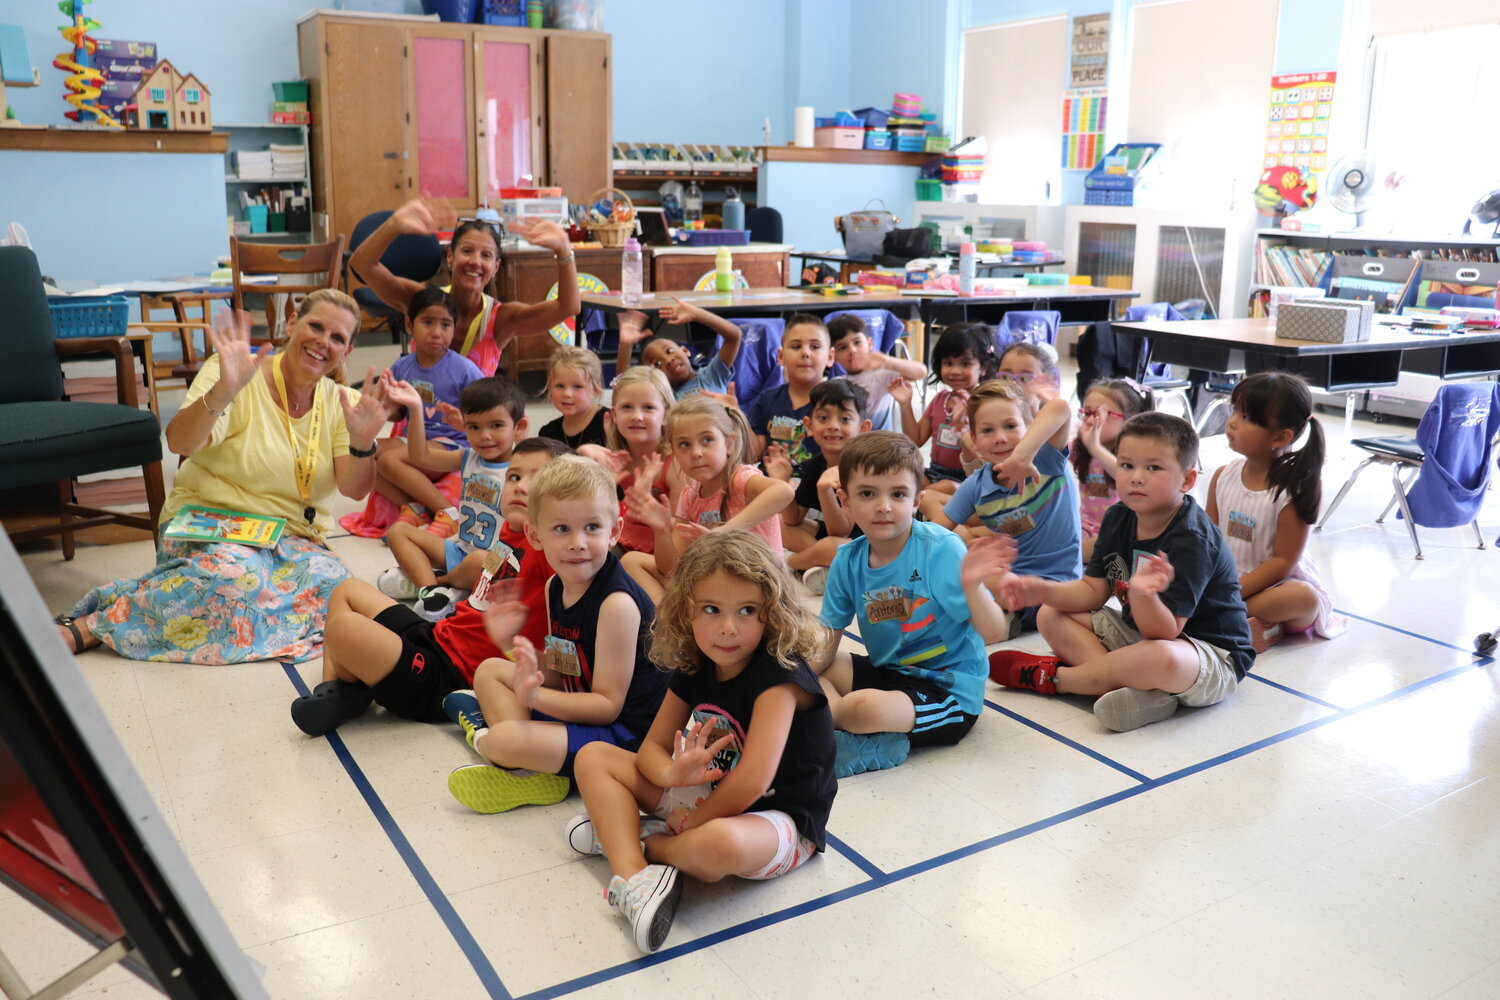 Students in Michele Miles and Margaret Sollenne’s class started their first day of kindergarten at Franklin Square’s Washington Street School on Sept. 5. For this class, the school year kicked off with some big smiles and shy glances.